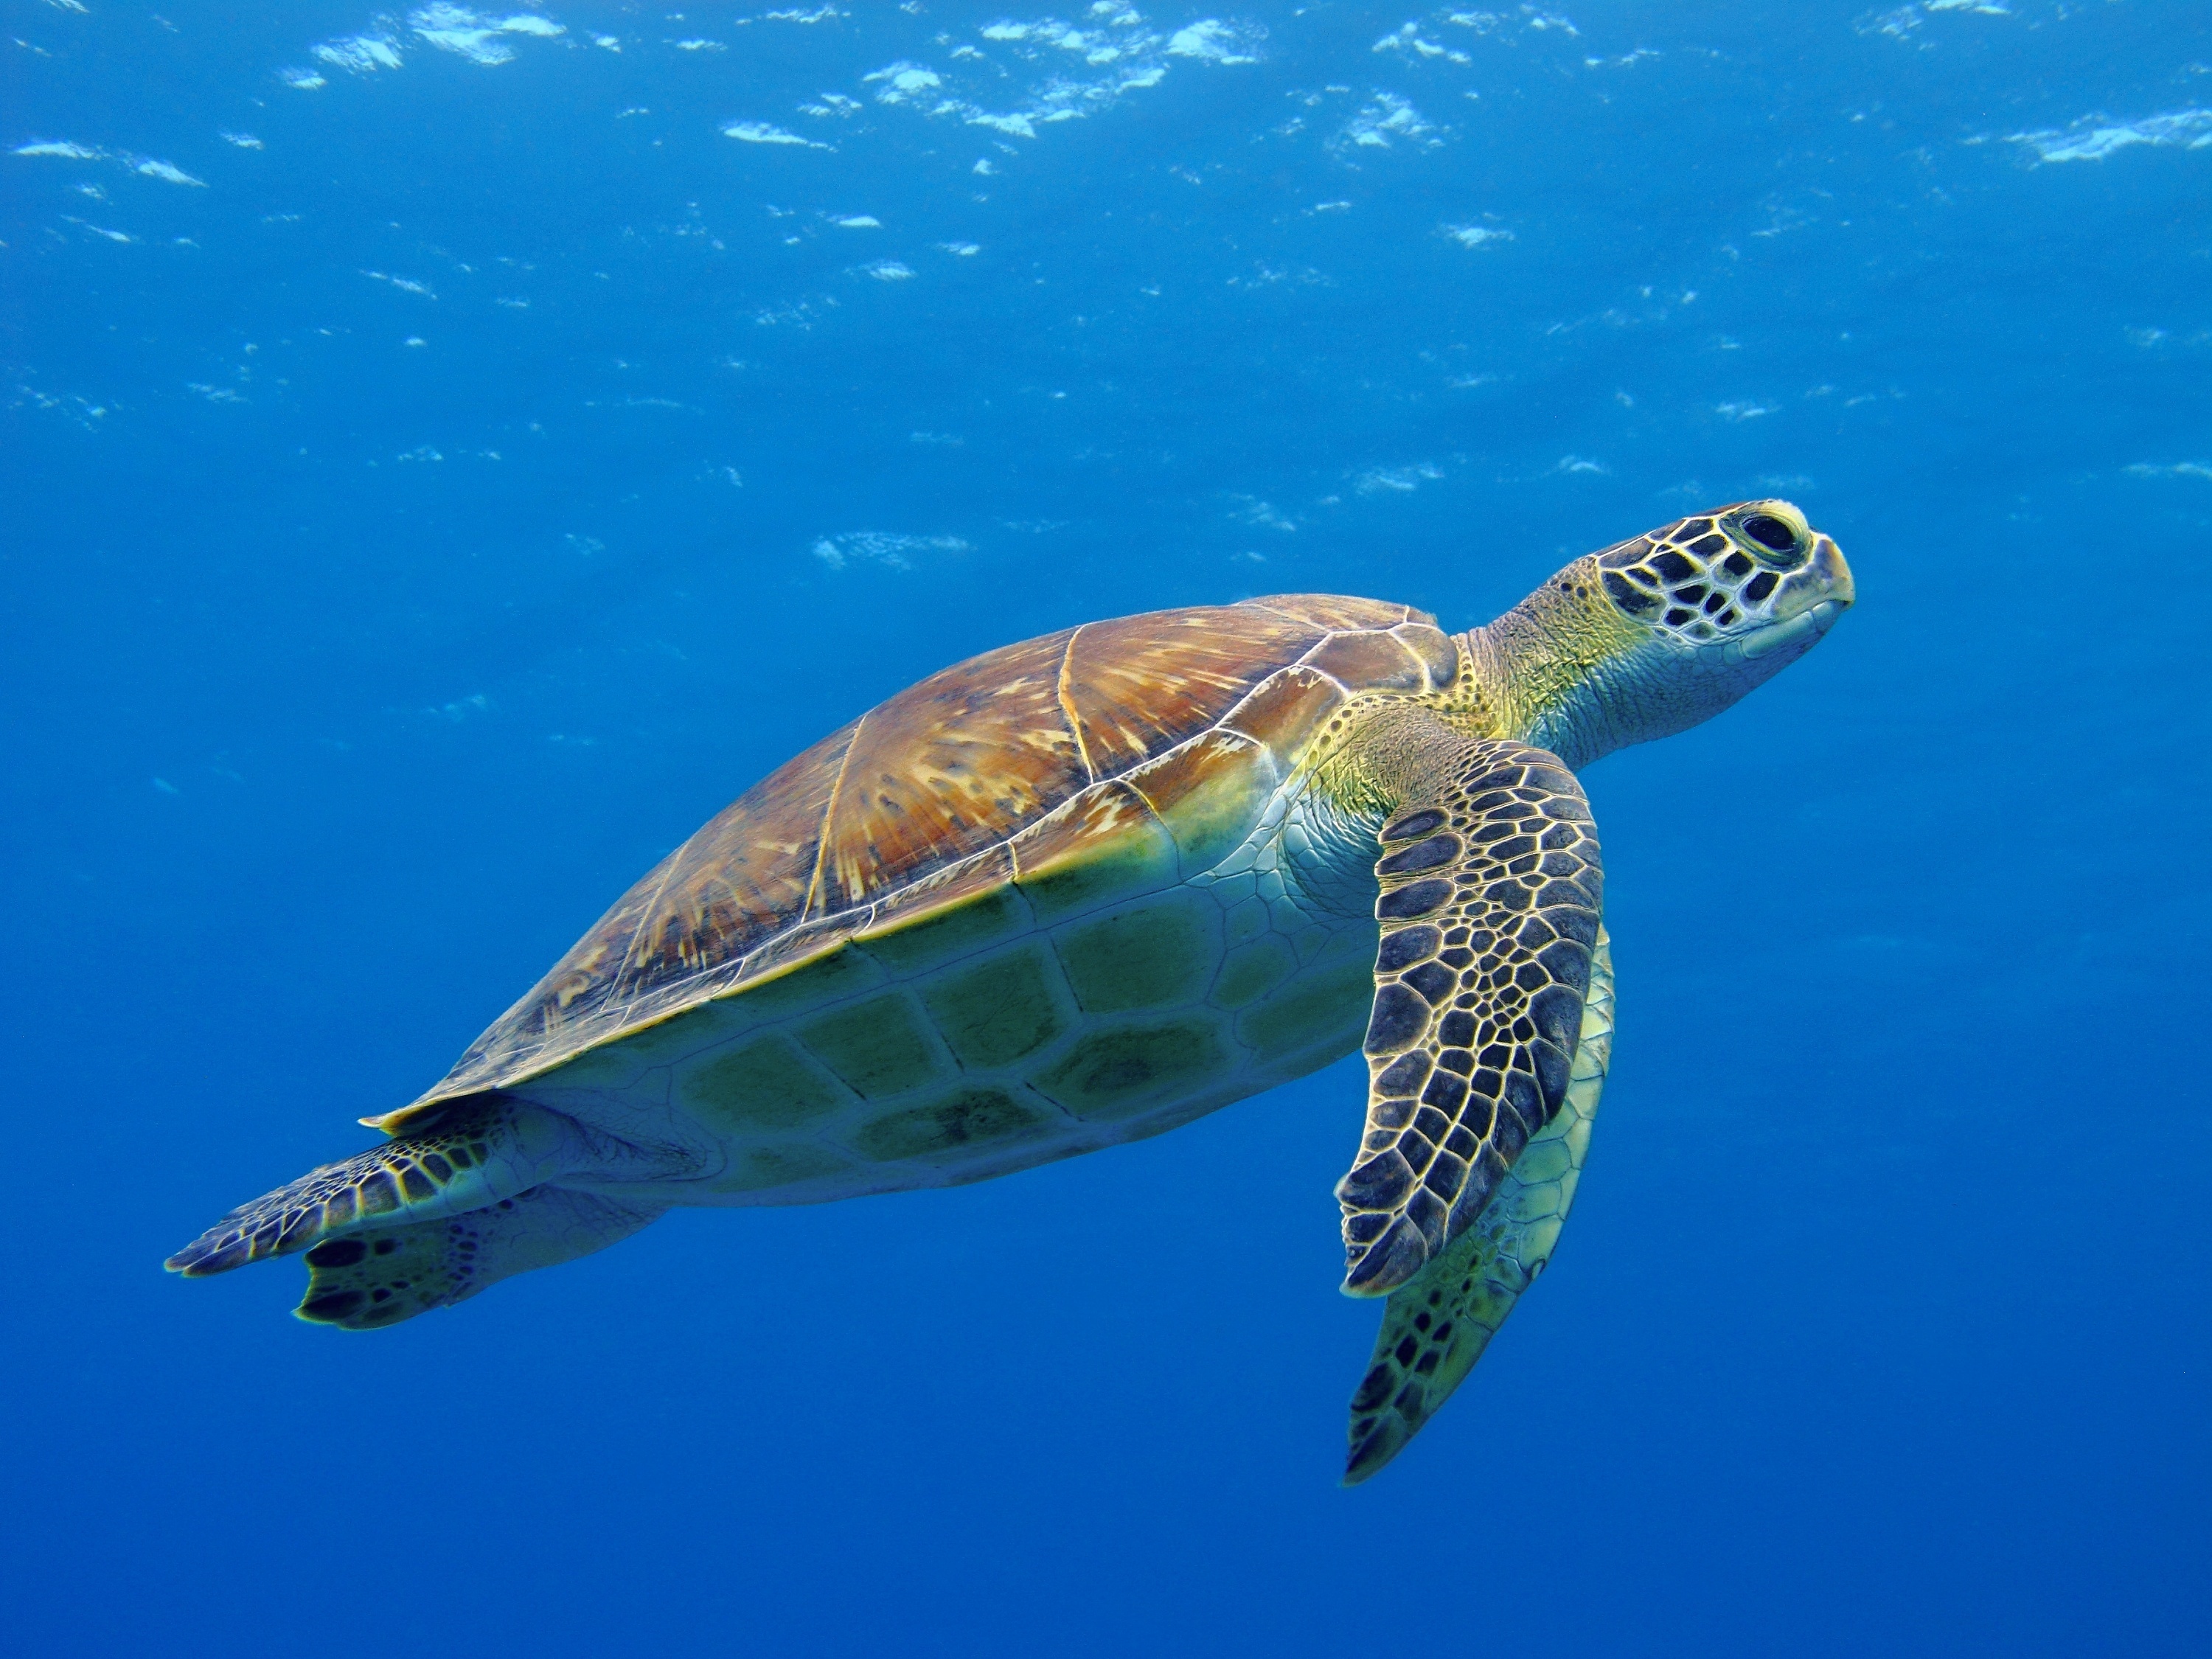 New species of ancient sea turtle discovered among fossils • Earth.com